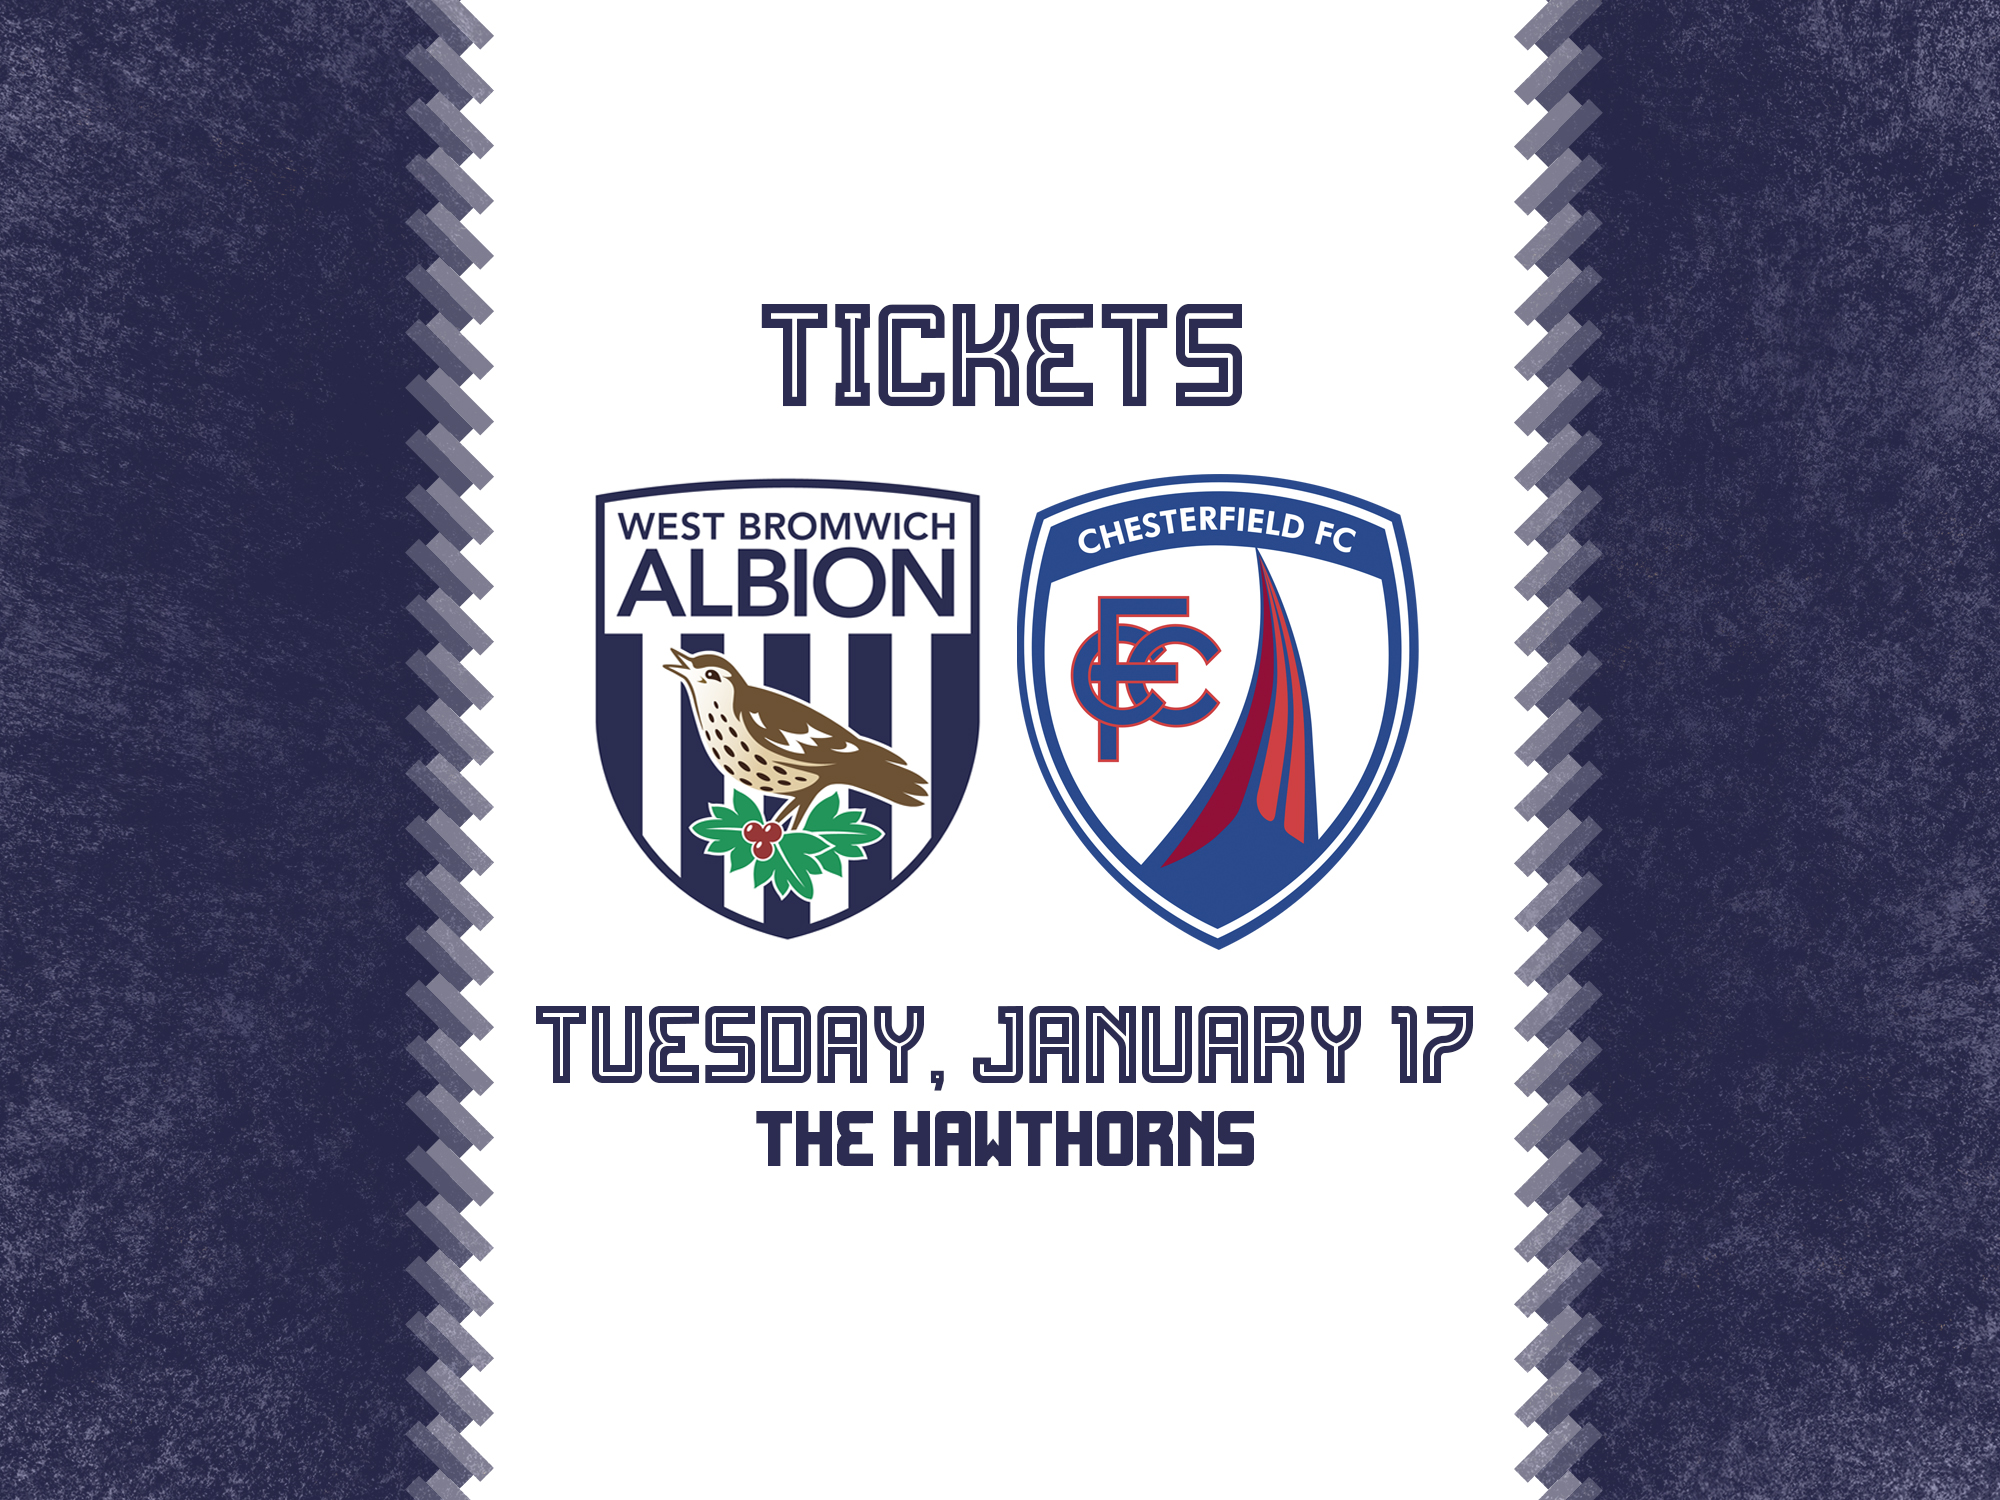 A ticket graphic for Albion's FA Cup replay against Chesterfield